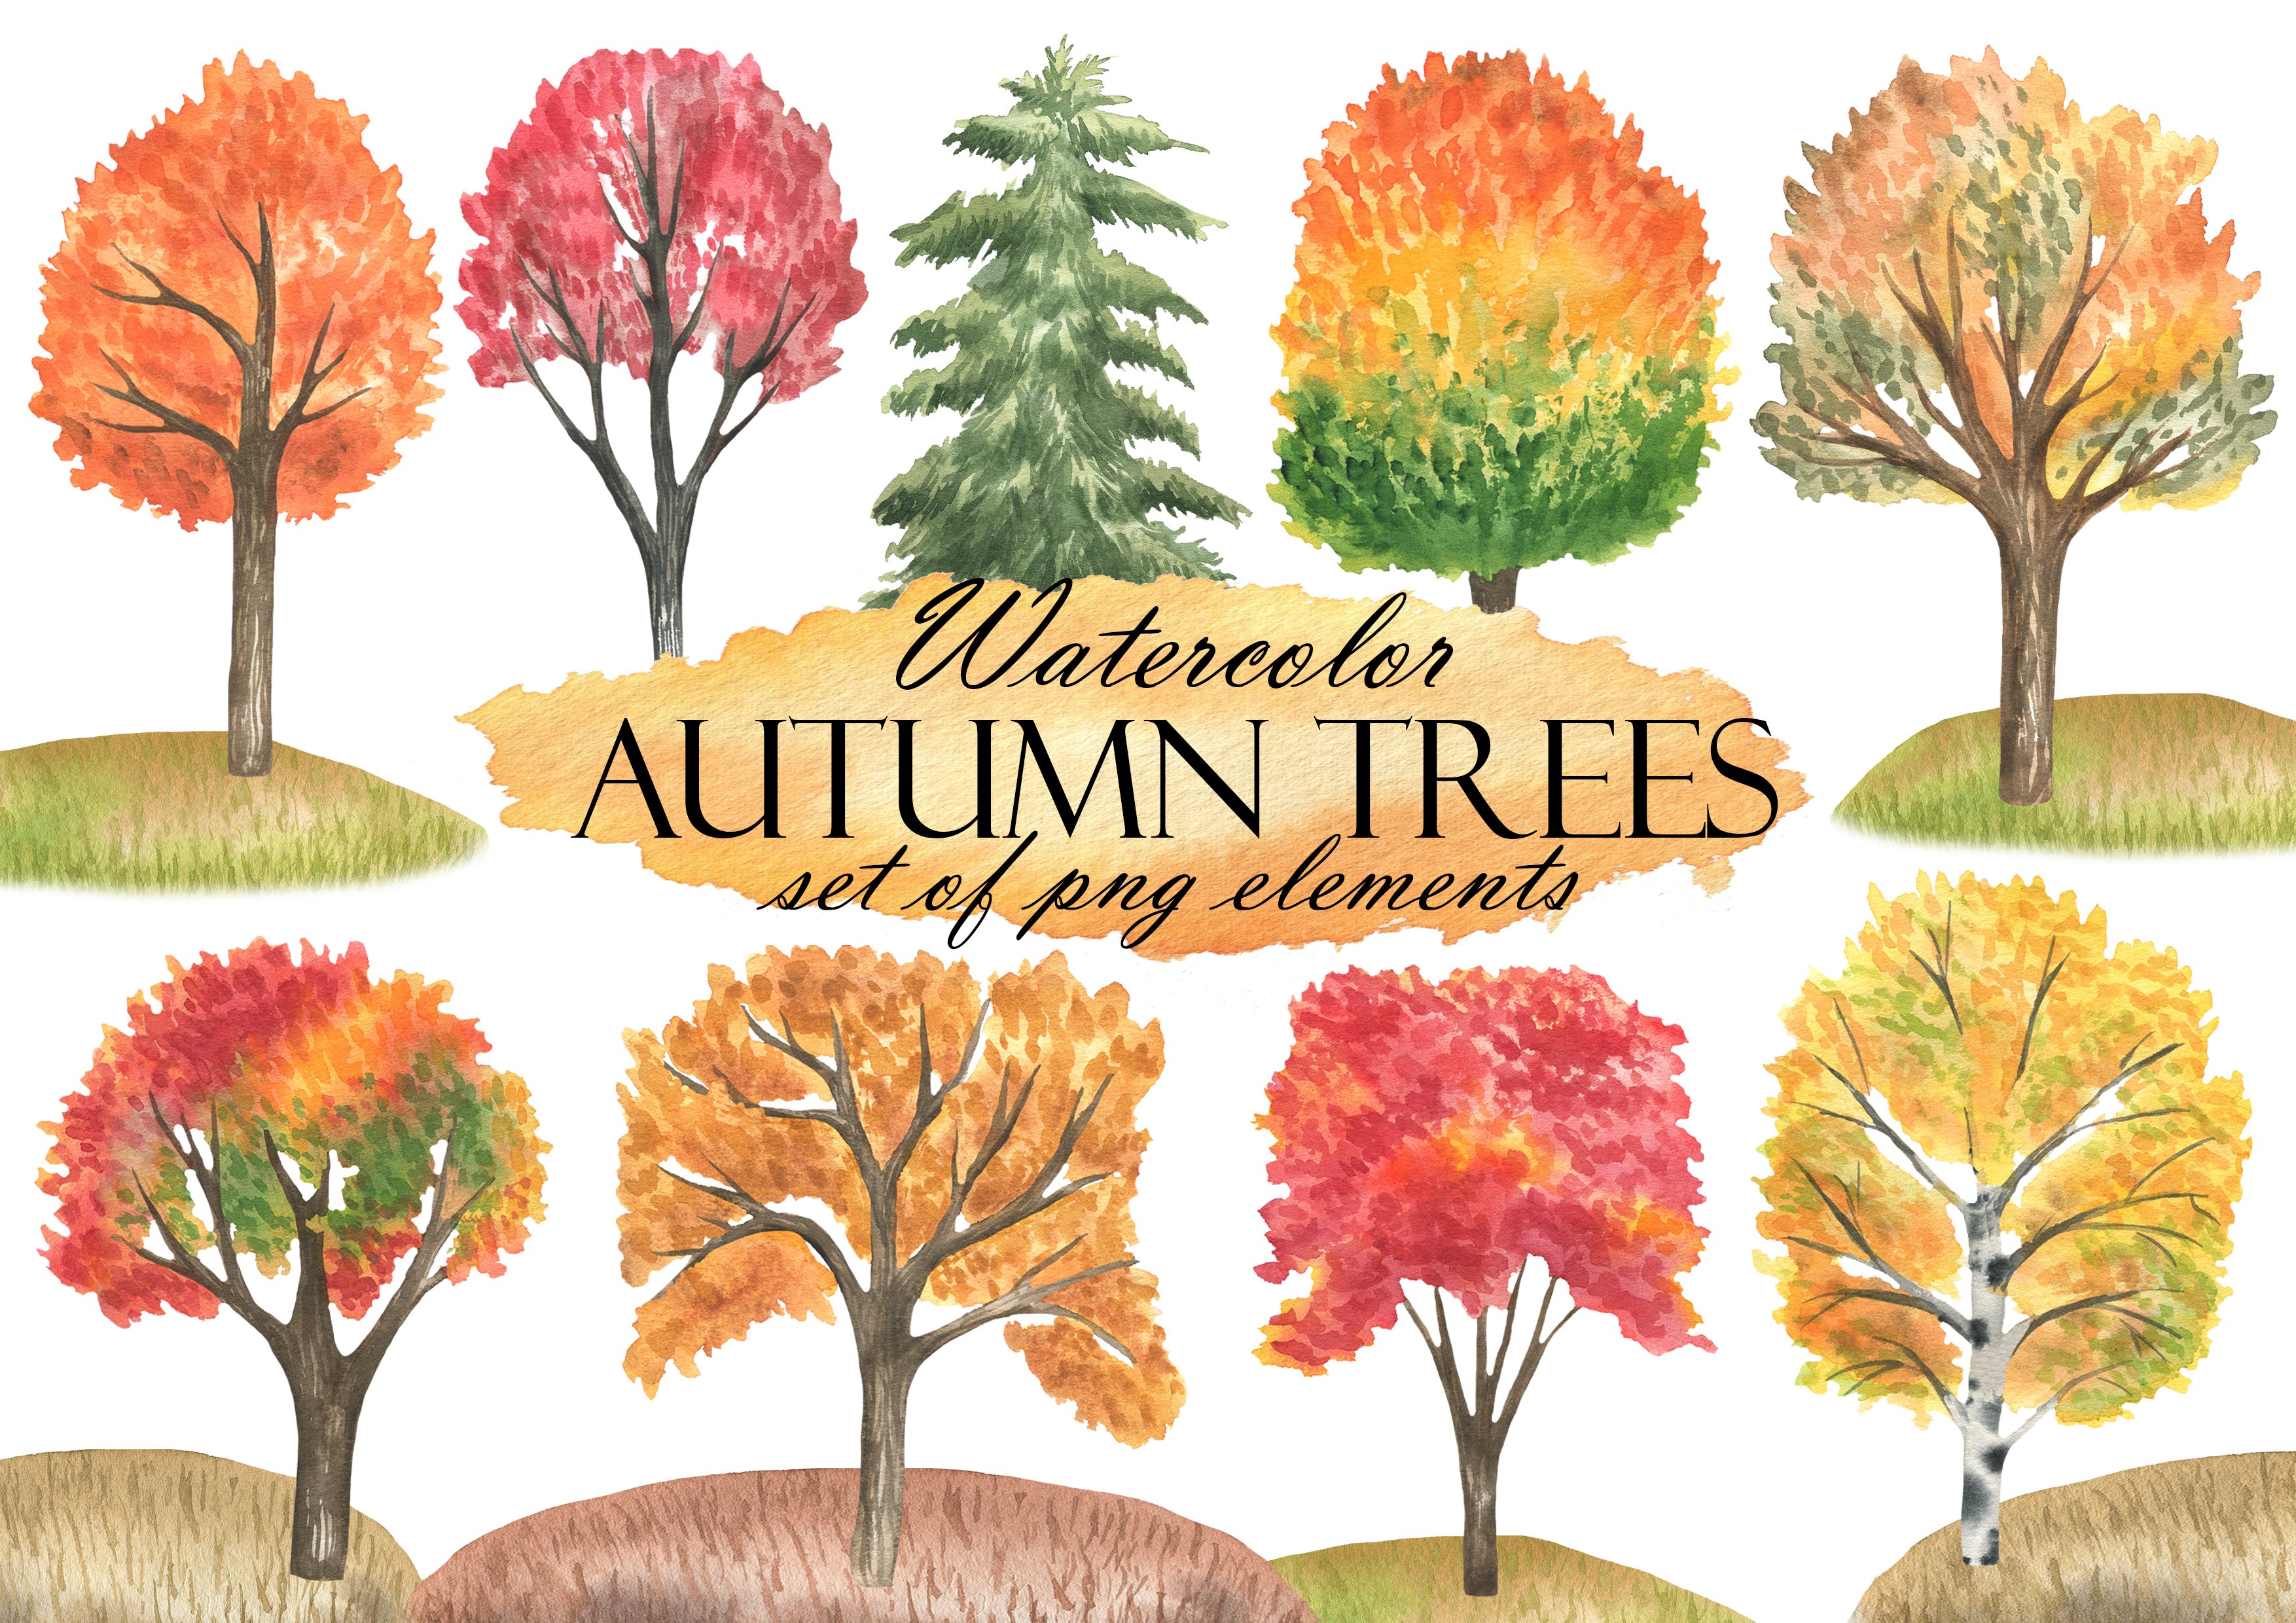 Autumn Forest Trees cover image.